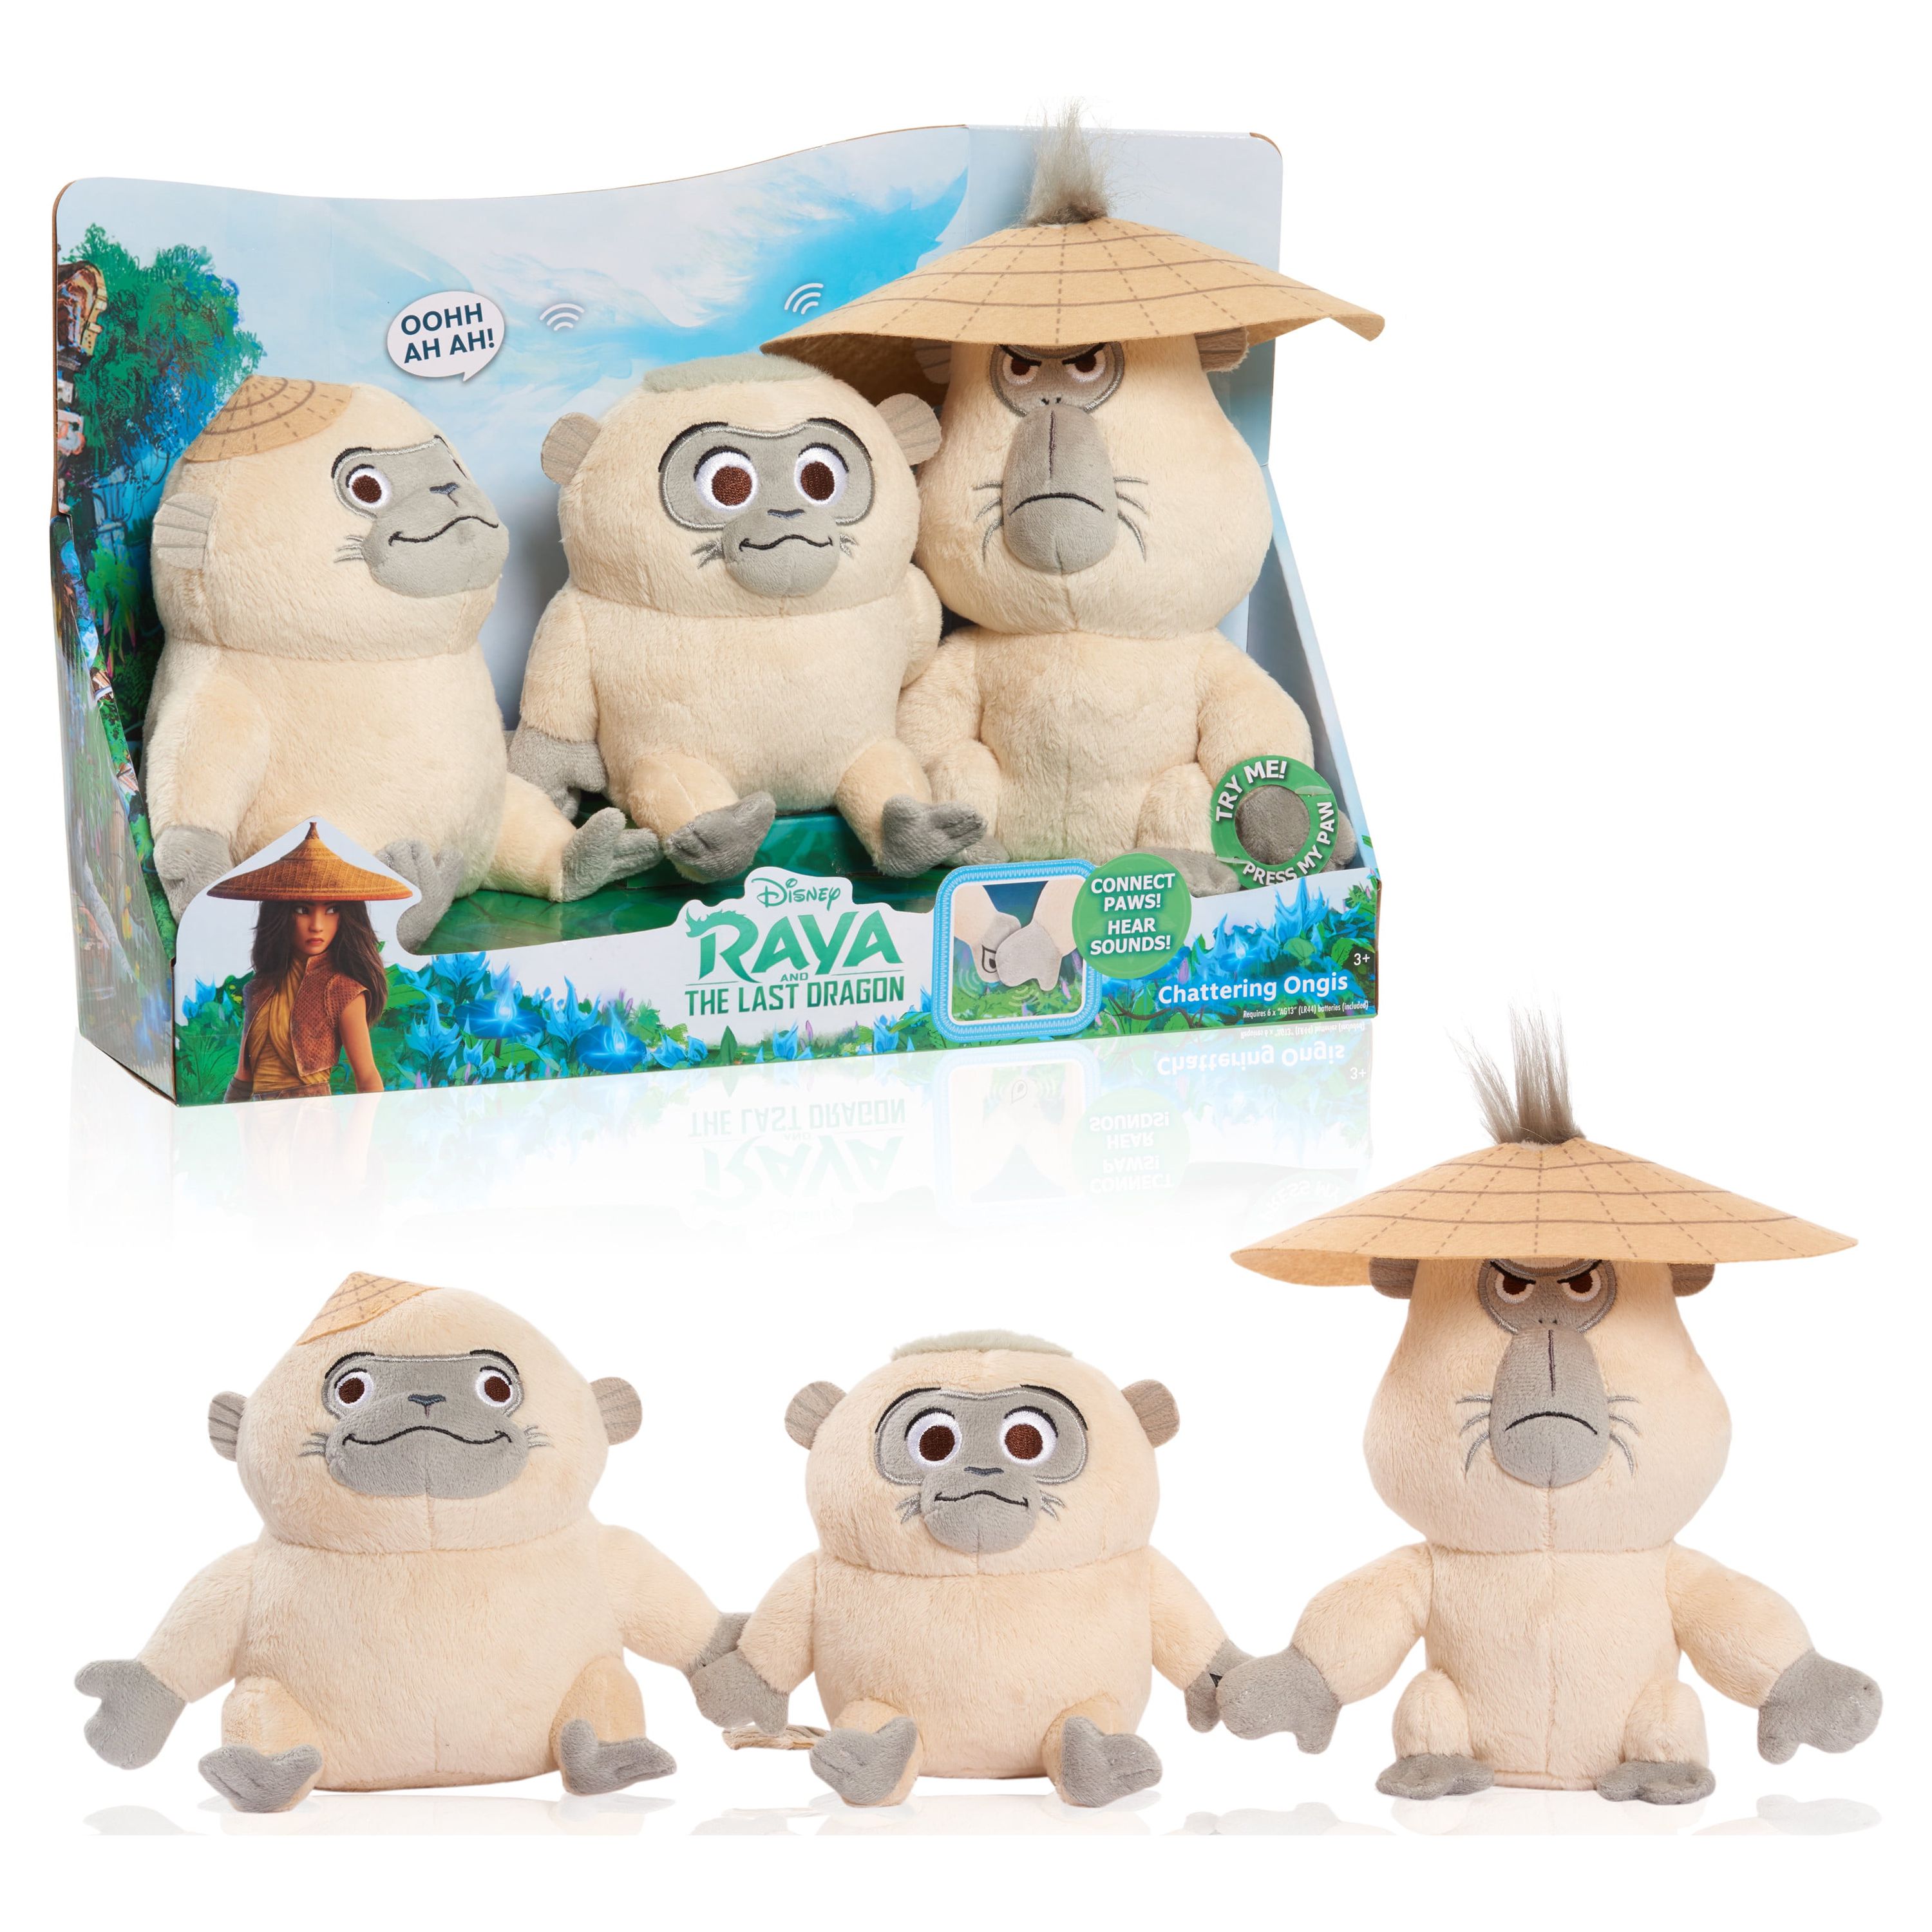 Disney Raya and the Last Dragon Chattering Ongis Plush, 3-piece set, connecting stuffed animals with sound, Officially Licensed Kids Toys for Ages 3 Up, Gifts and Presents - image 1 of 8